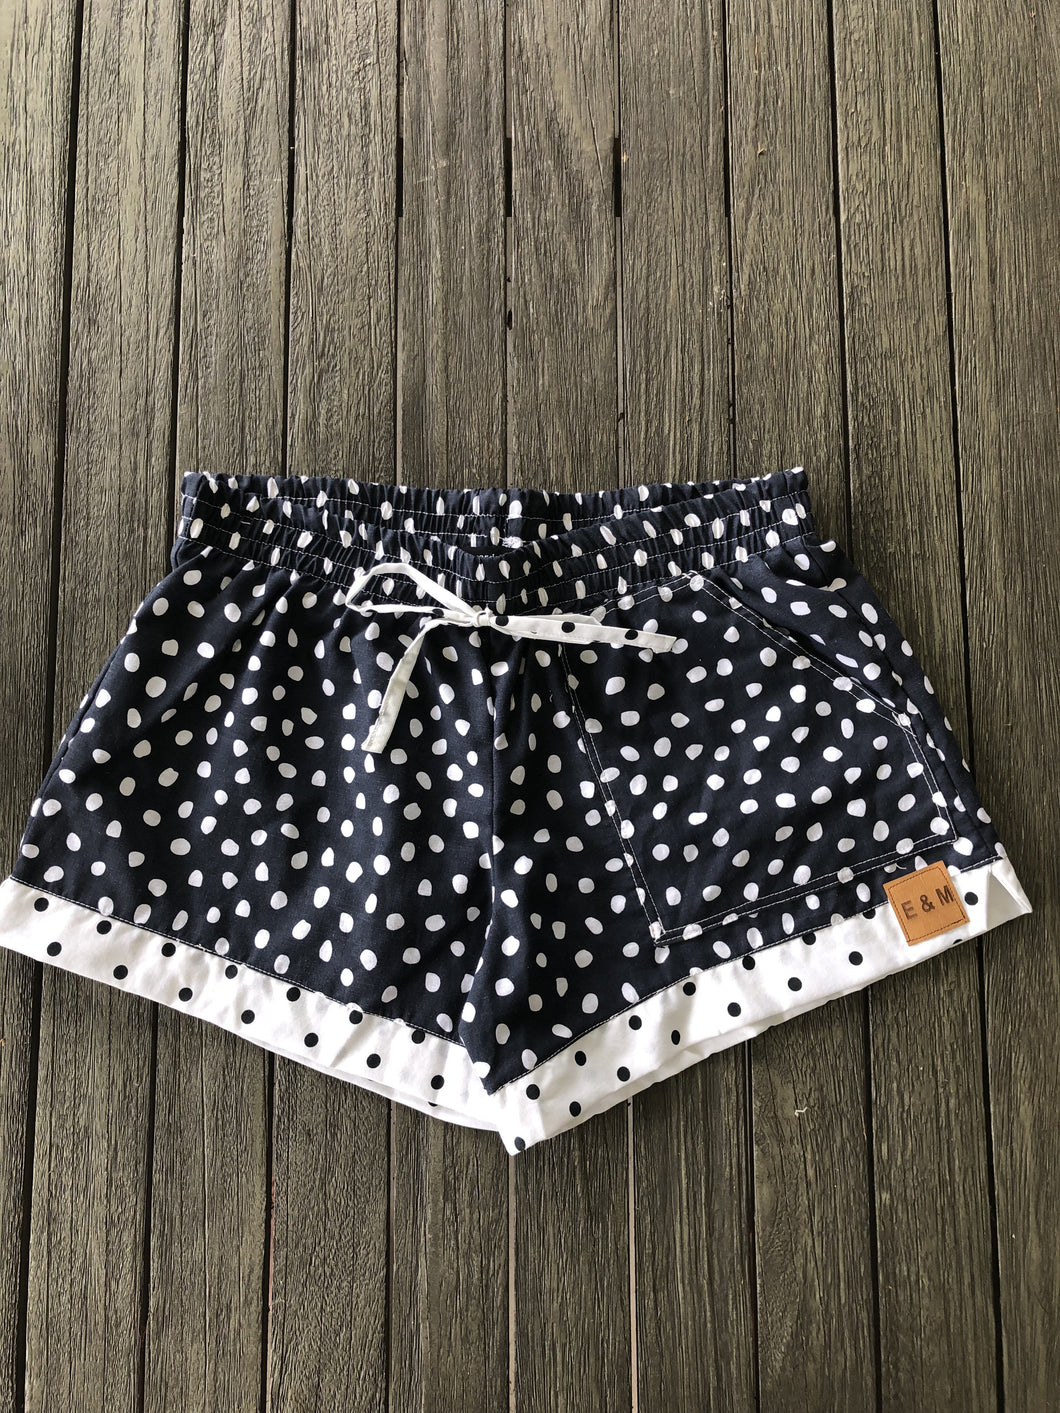 Dot to Dot Womens Boutique Boxers